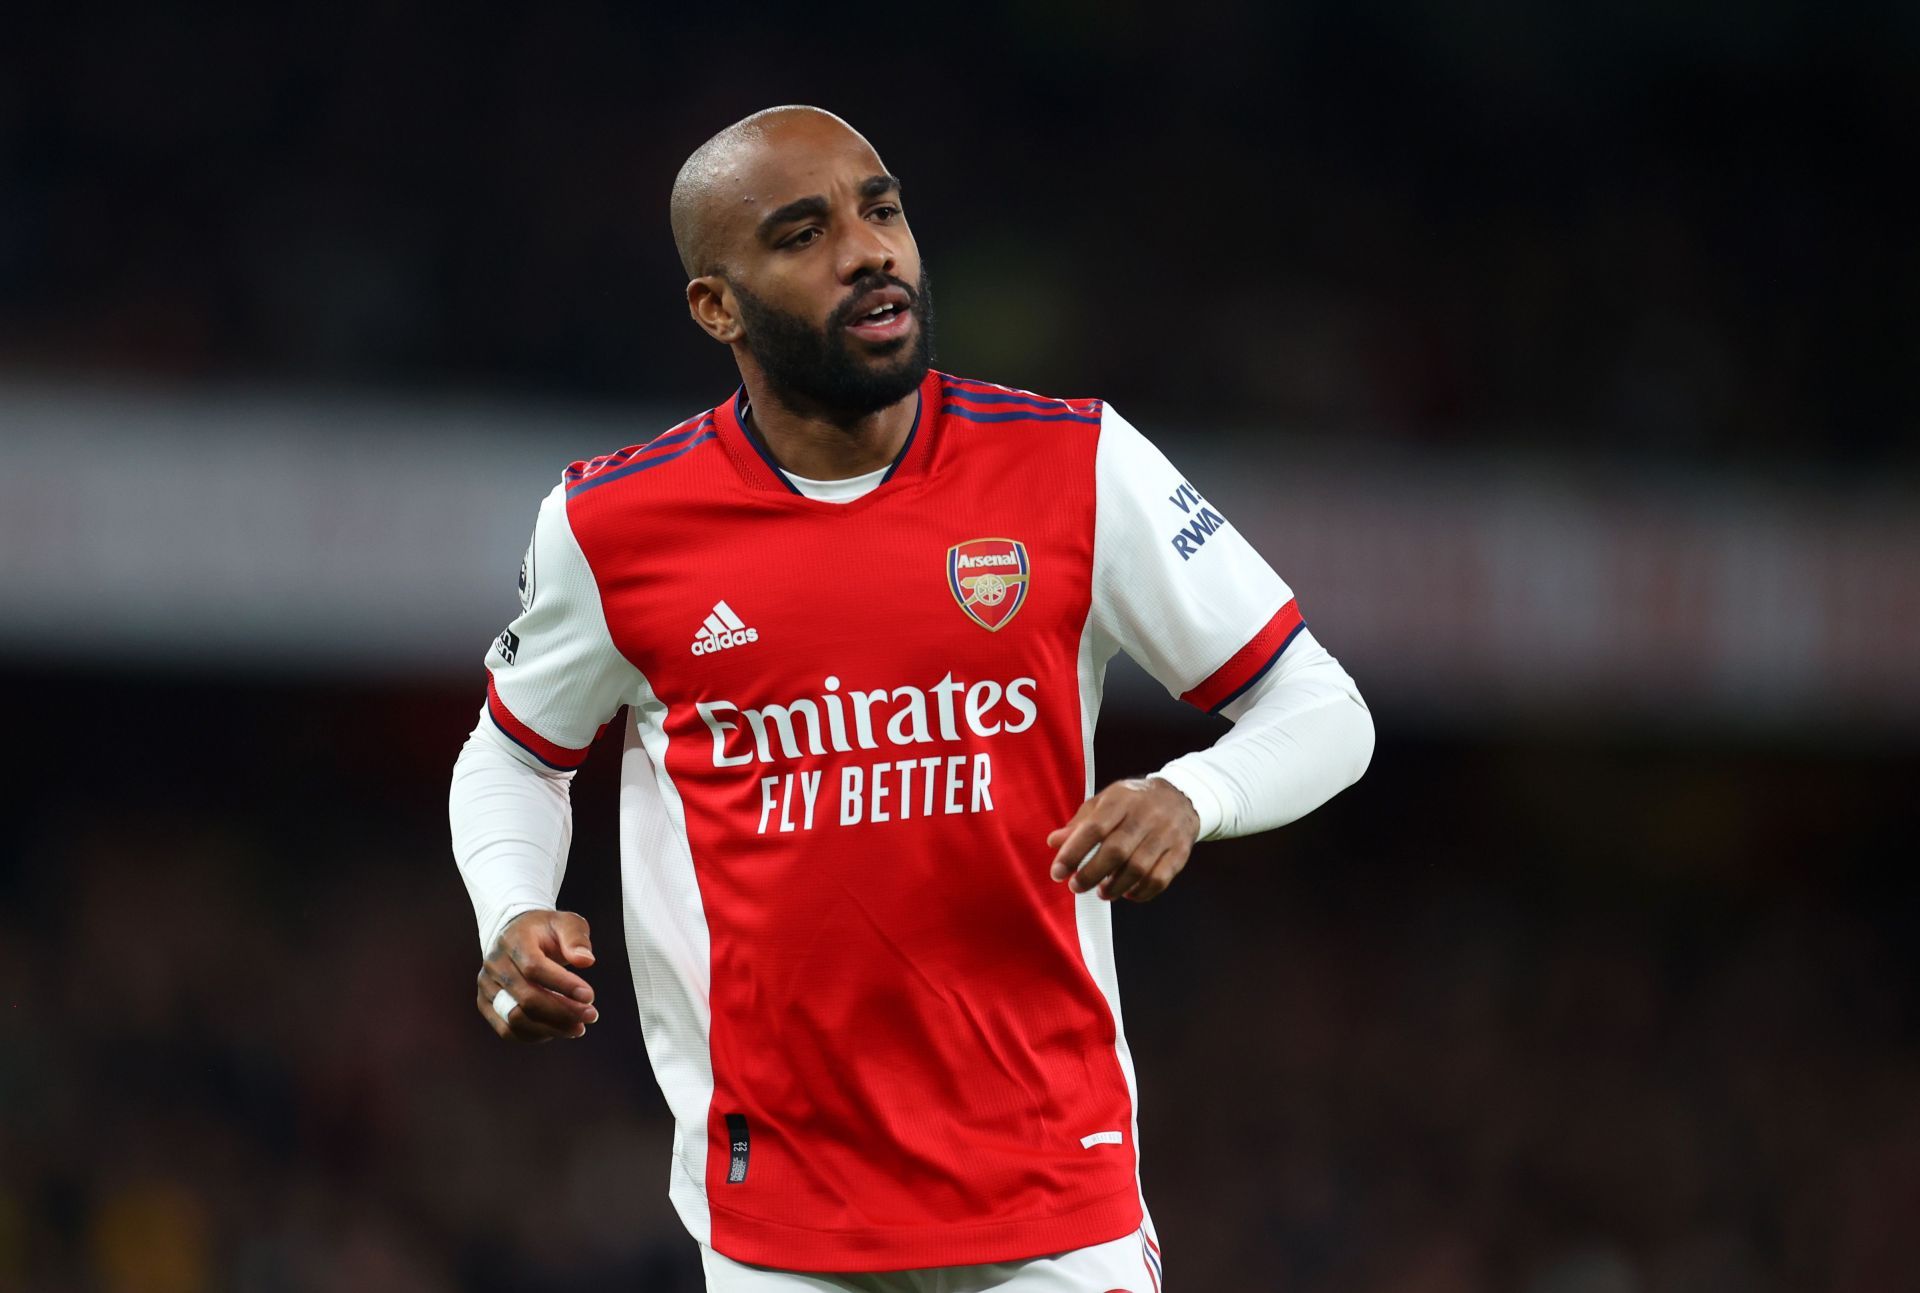 Inter Milan are ready to offer Alexandre Lacazette a three-year deal to make him move to the San Siro.